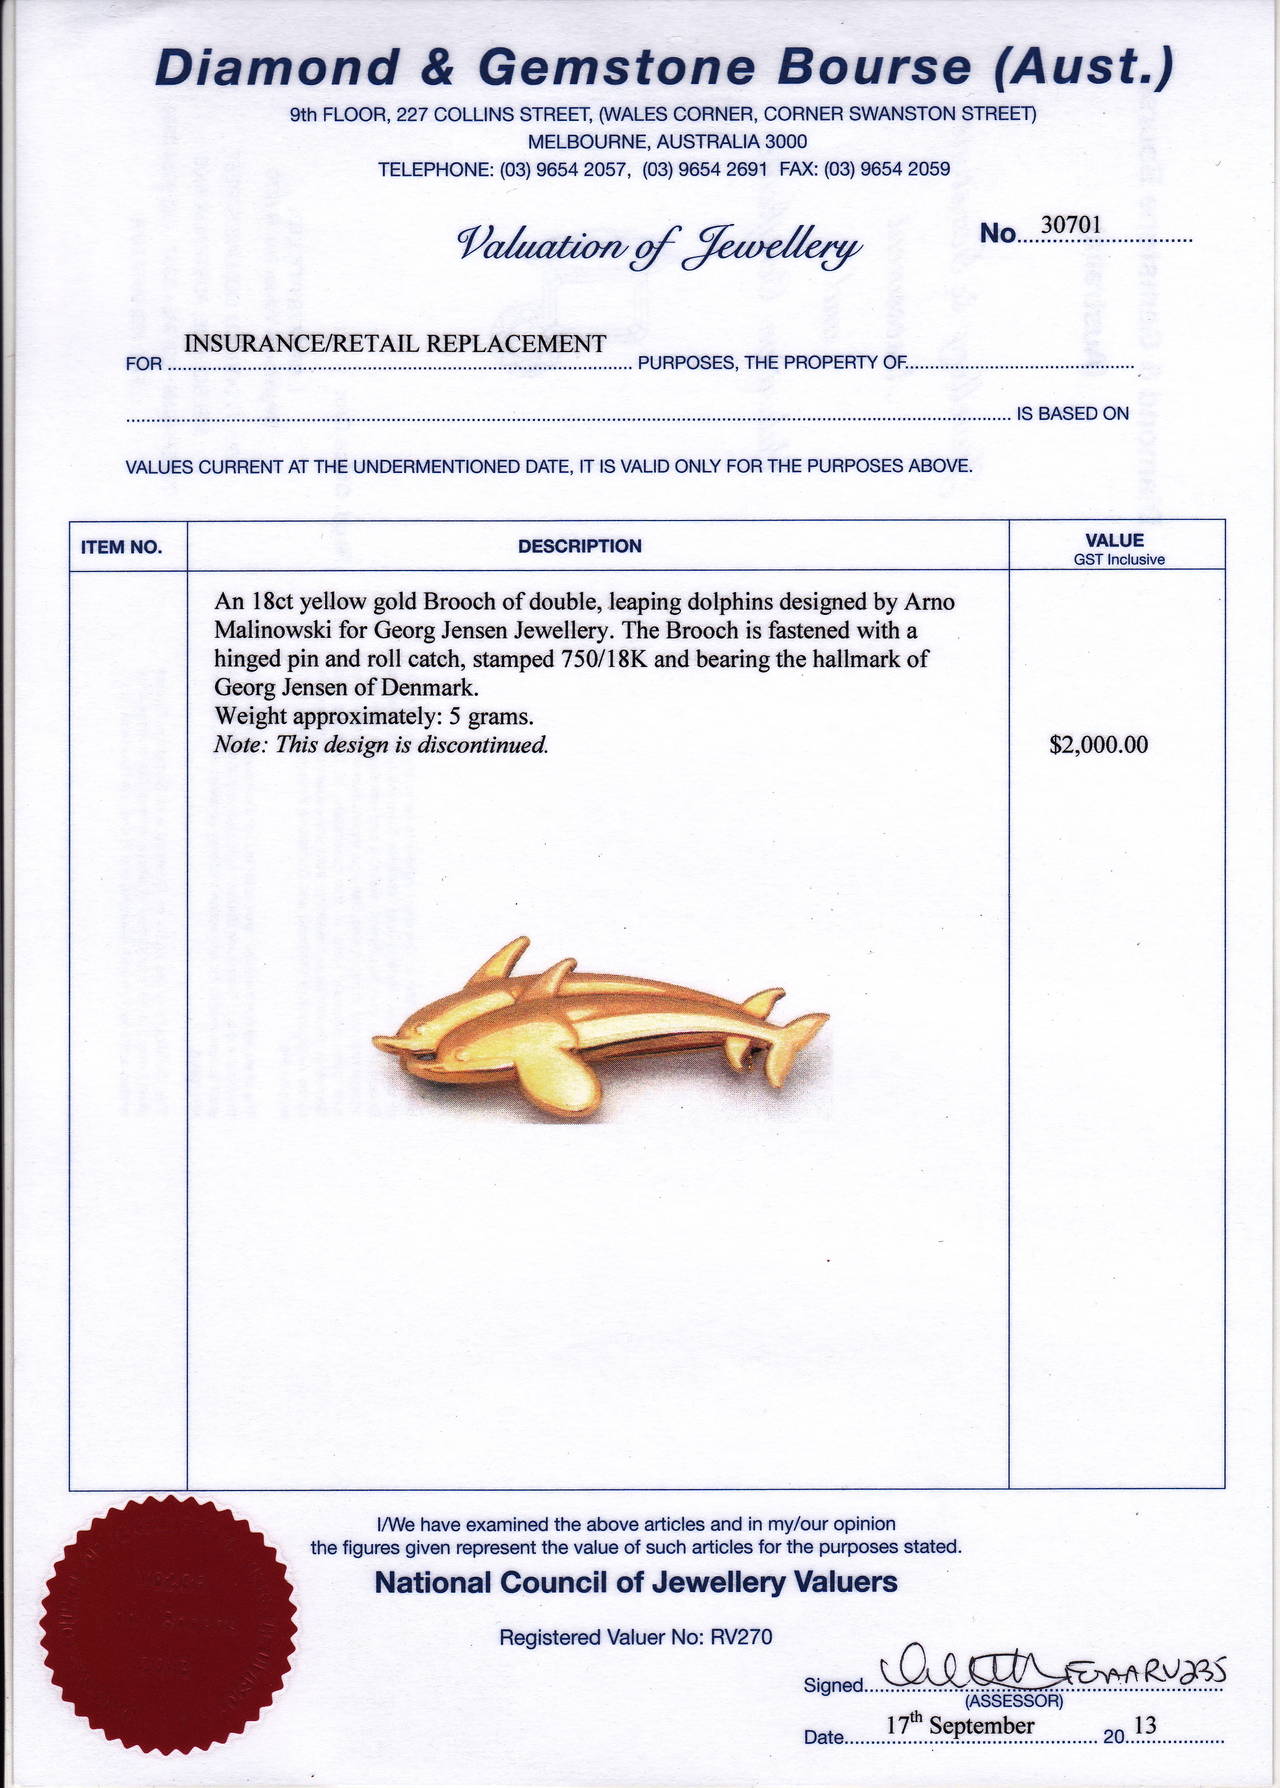 George Jensen 18 Carat Yellow Gold Double Dolphin Brooch In Good Condition For Sale In Malvern, Victoria